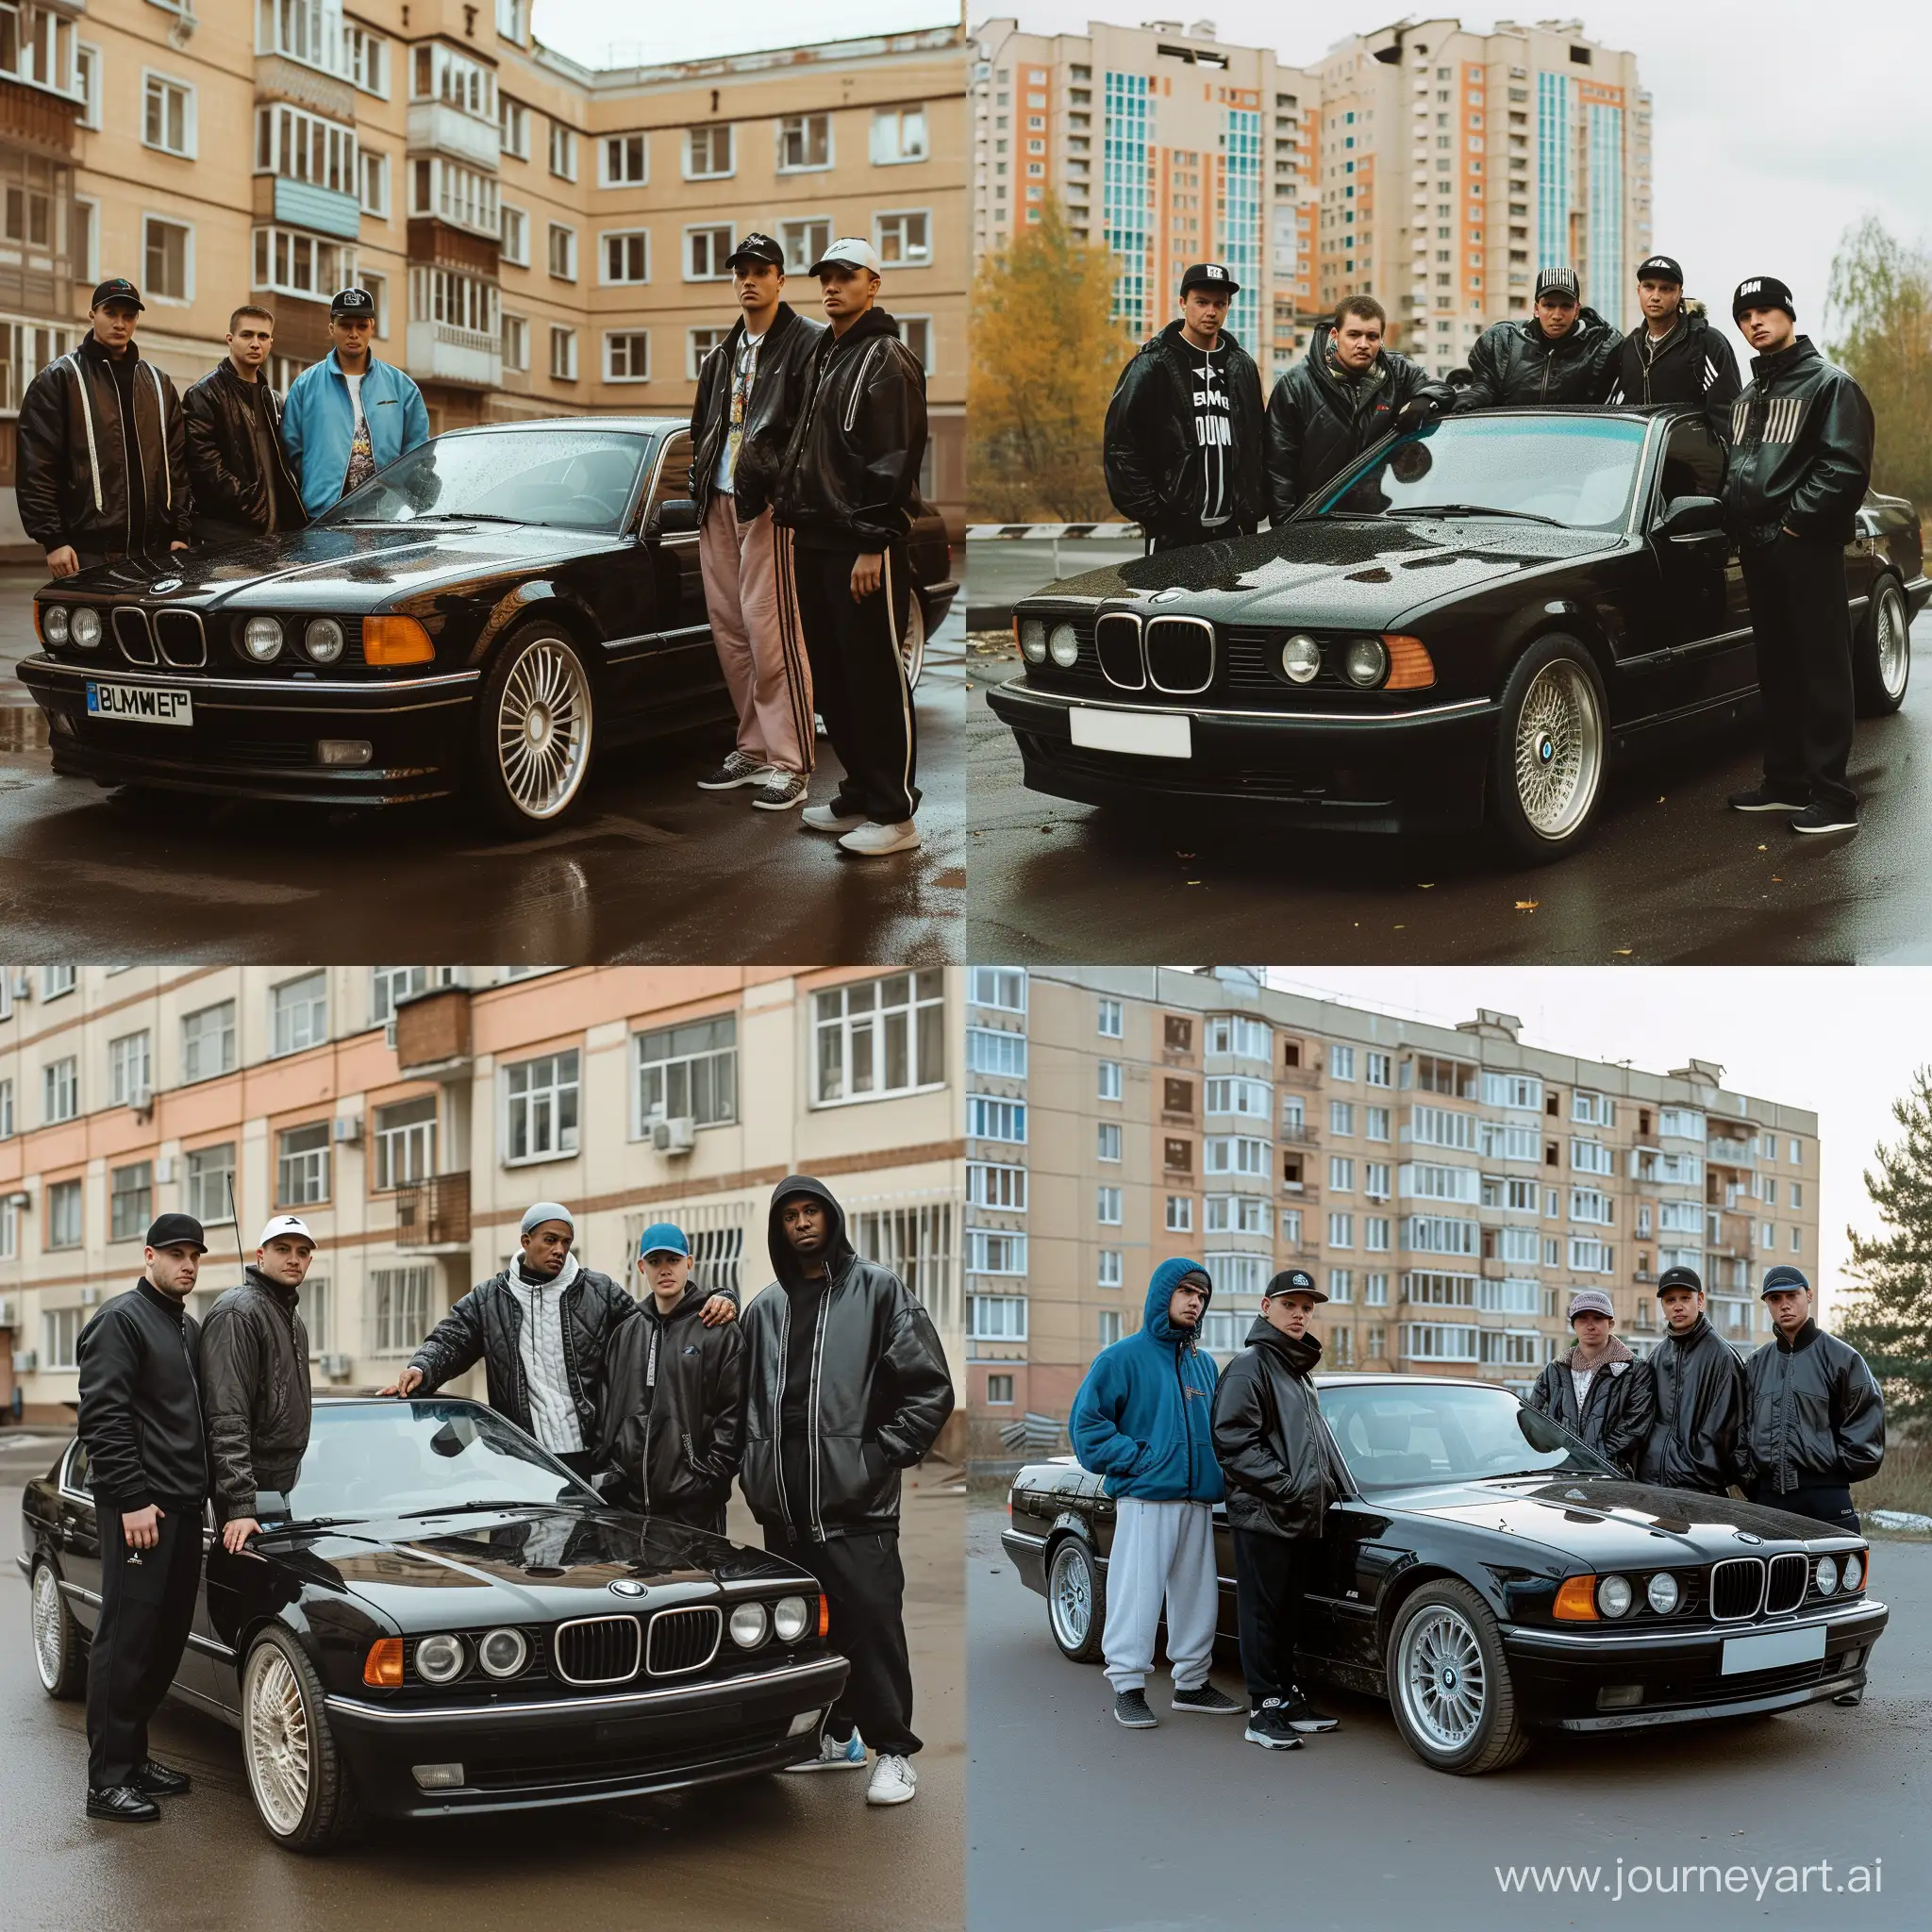 Late-90s-Moscow-Region-Joyride-Black-BMW-750iL-Friends-in-Tracksuits-and-Leather-Jackets